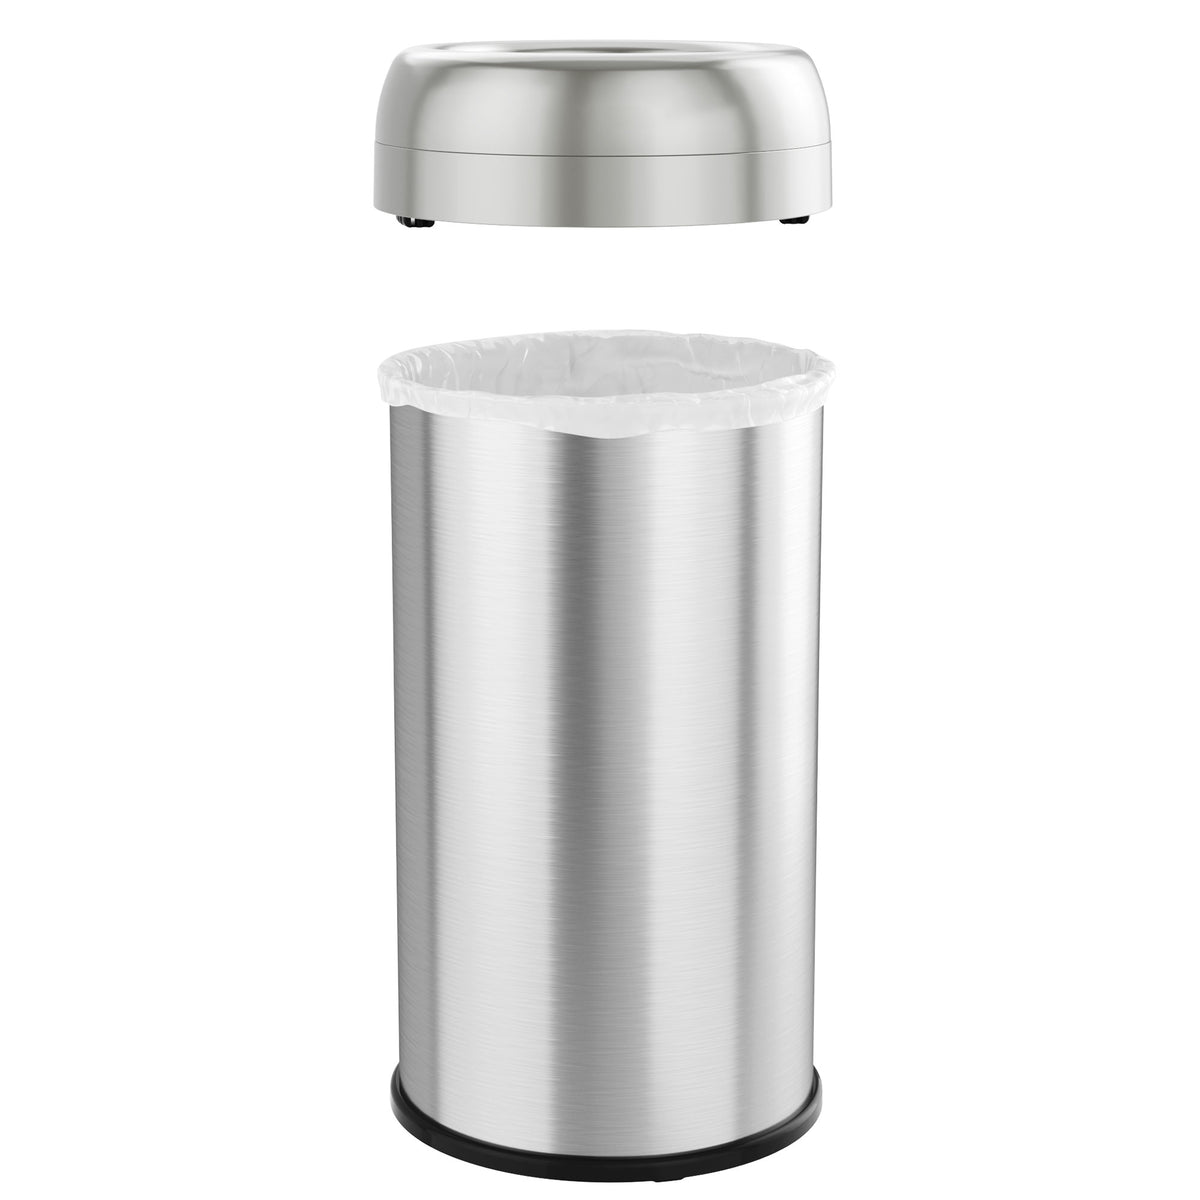 16 Gallon / 60 Liter Round Open Top Trash Can with Wheels snug fit lid